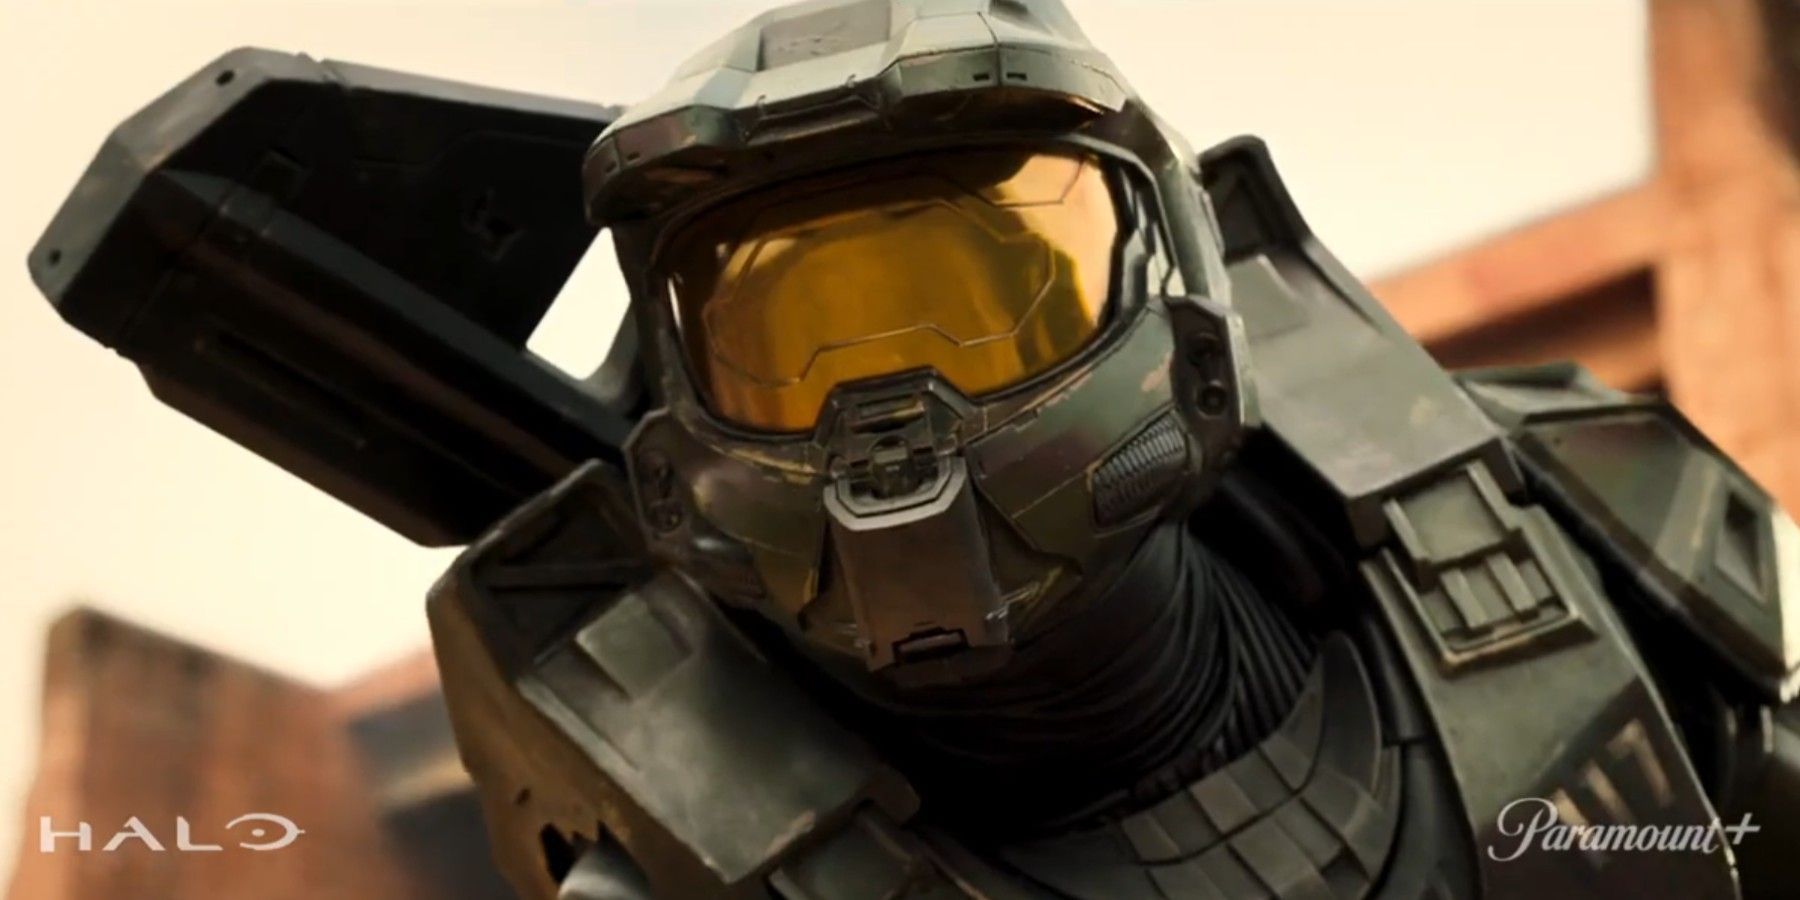 Halo TV Show Has Separate Canon From Game Series